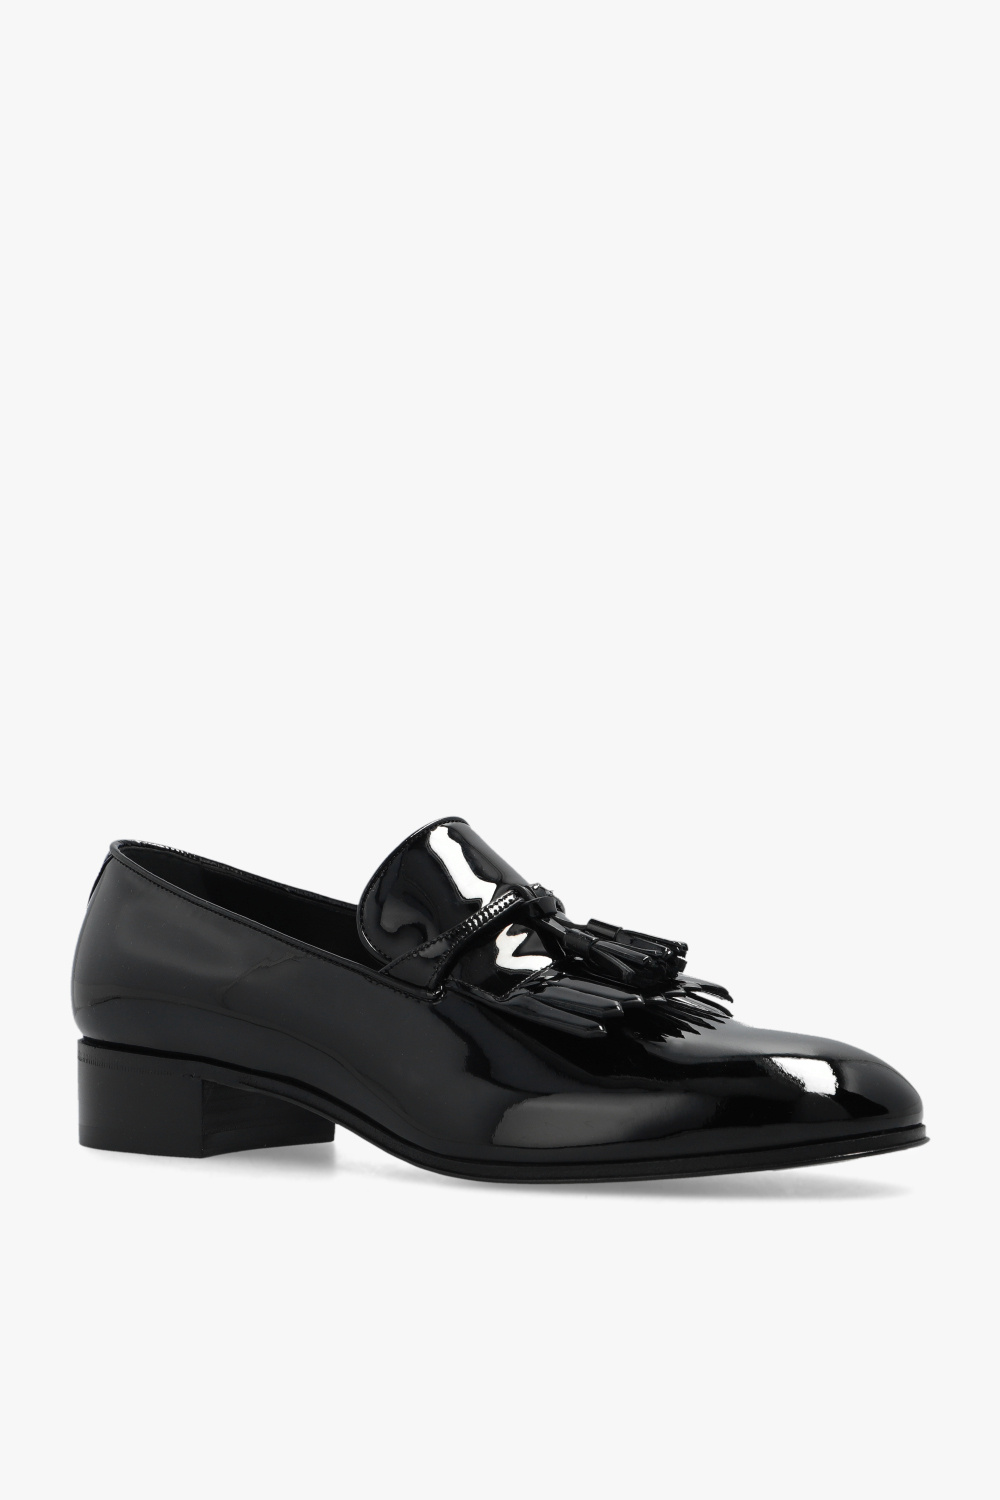 gucci jumper Patent-leather loafers